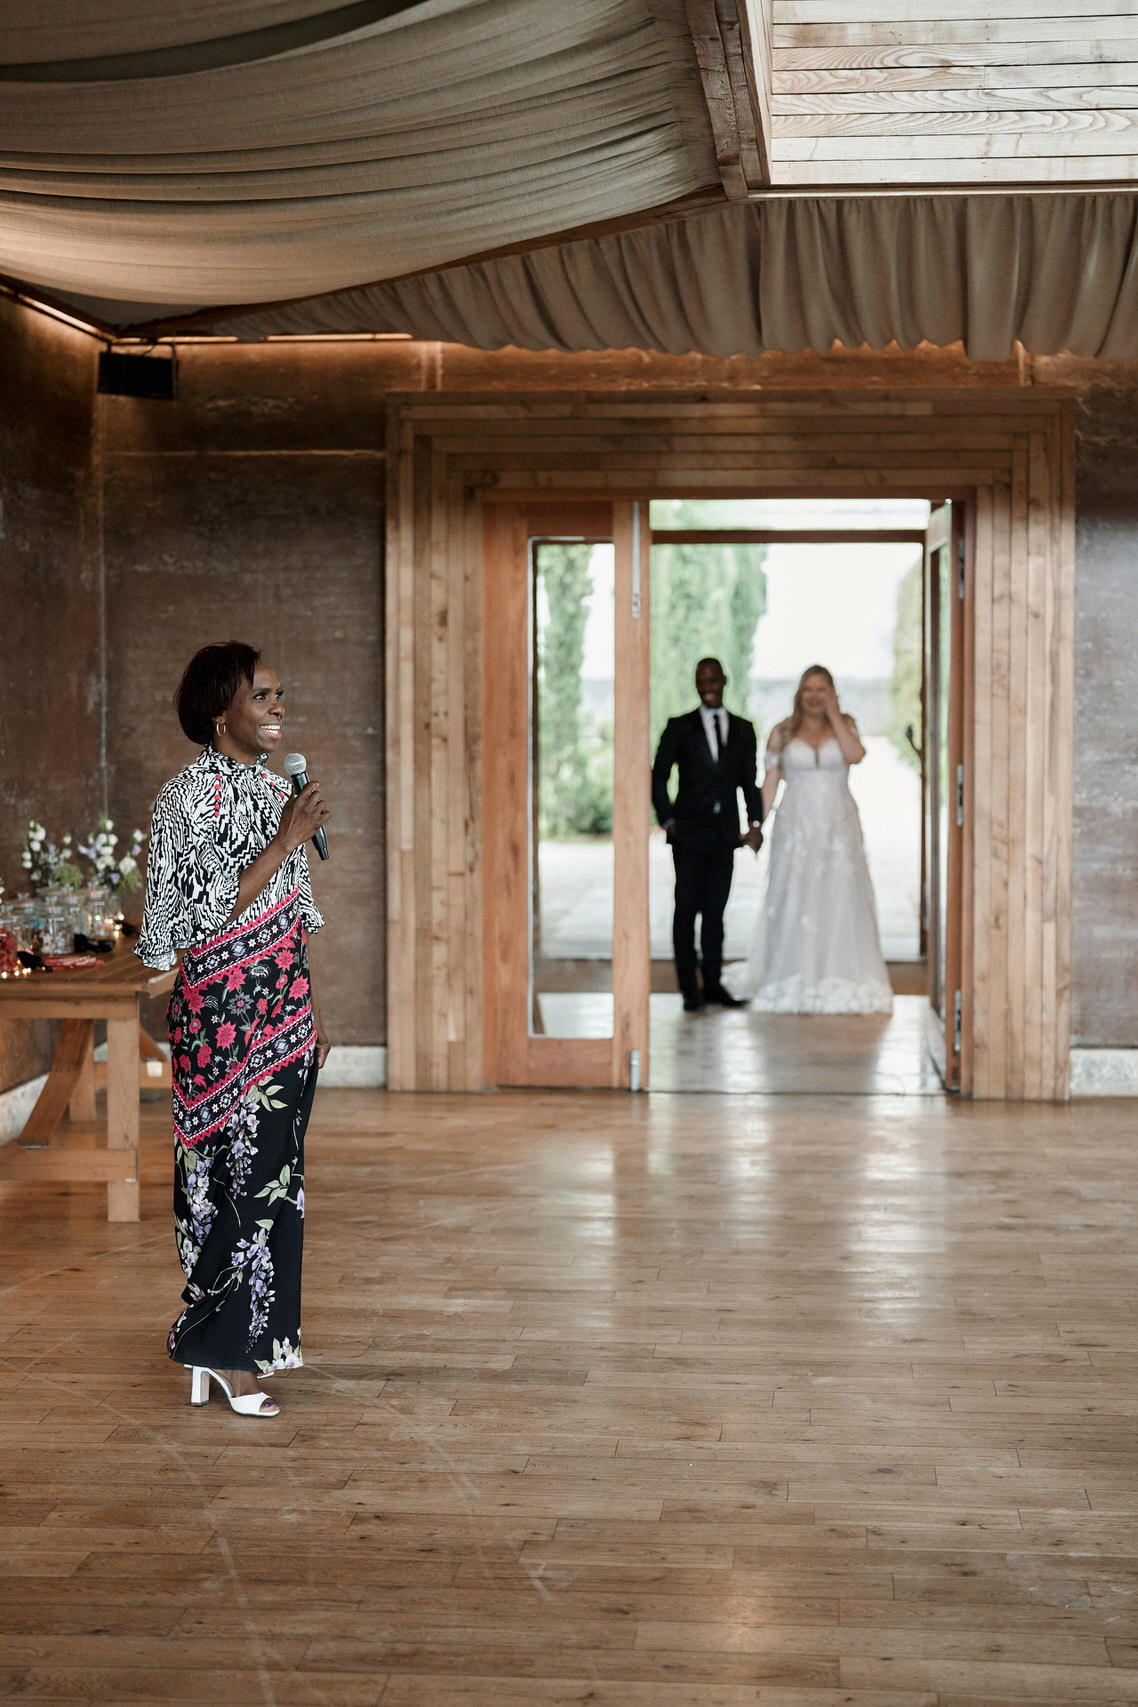 A couple getting married is standing in a room made of wood.